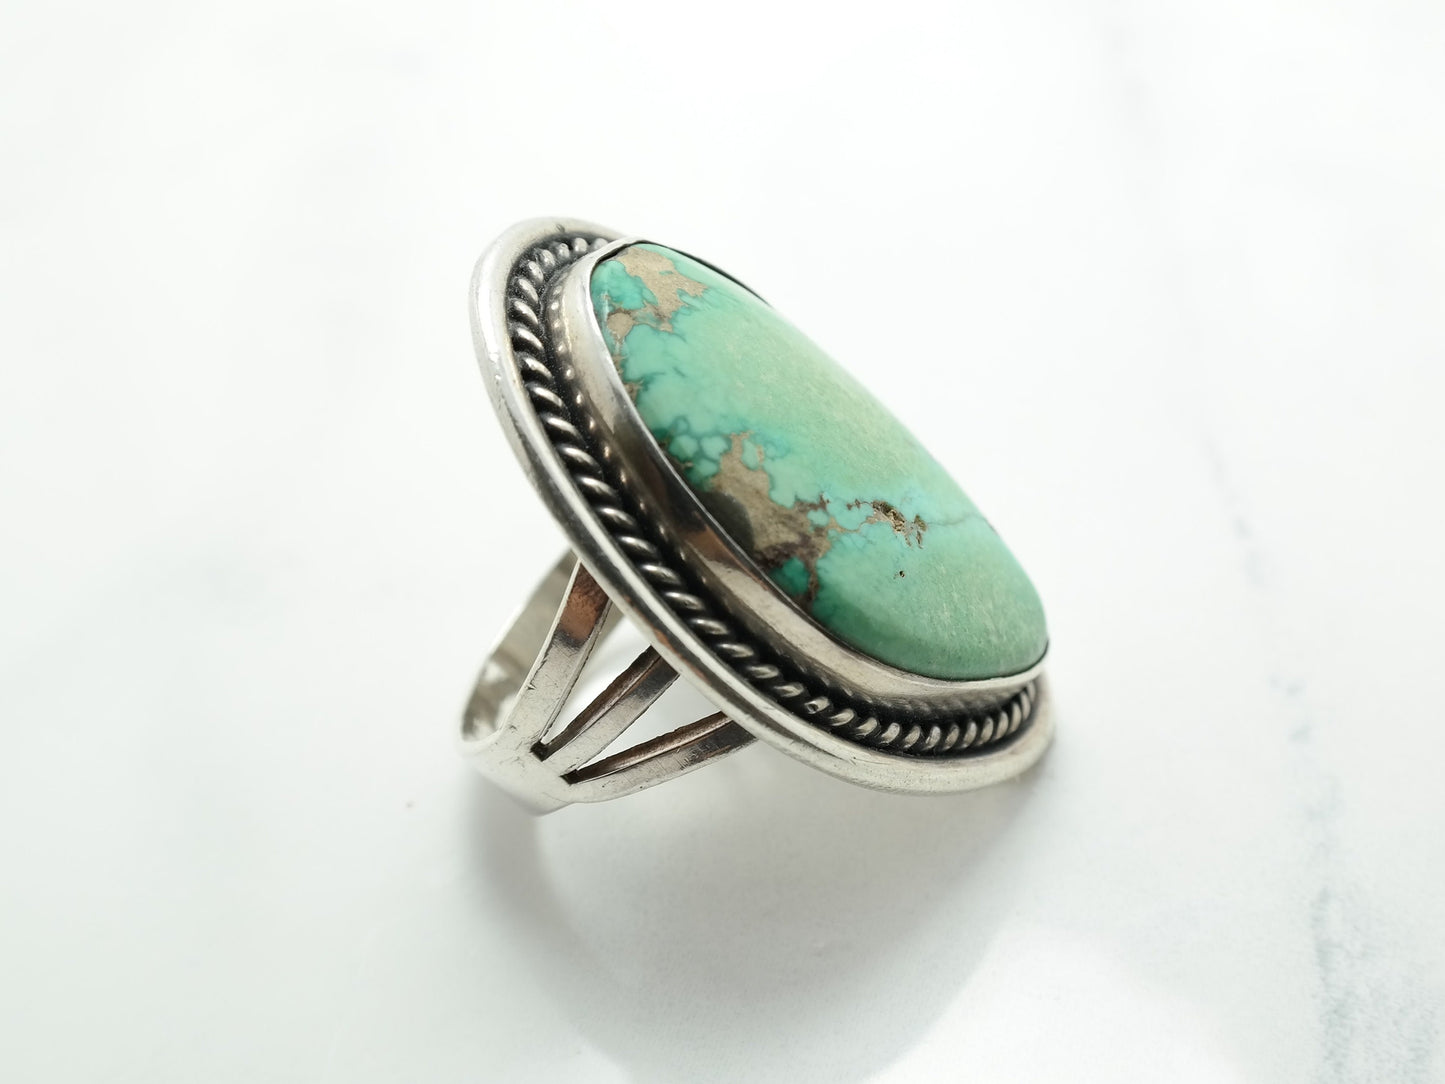 Vintage Native American Ring Turquoise Sterling Silver Size 10 1/2